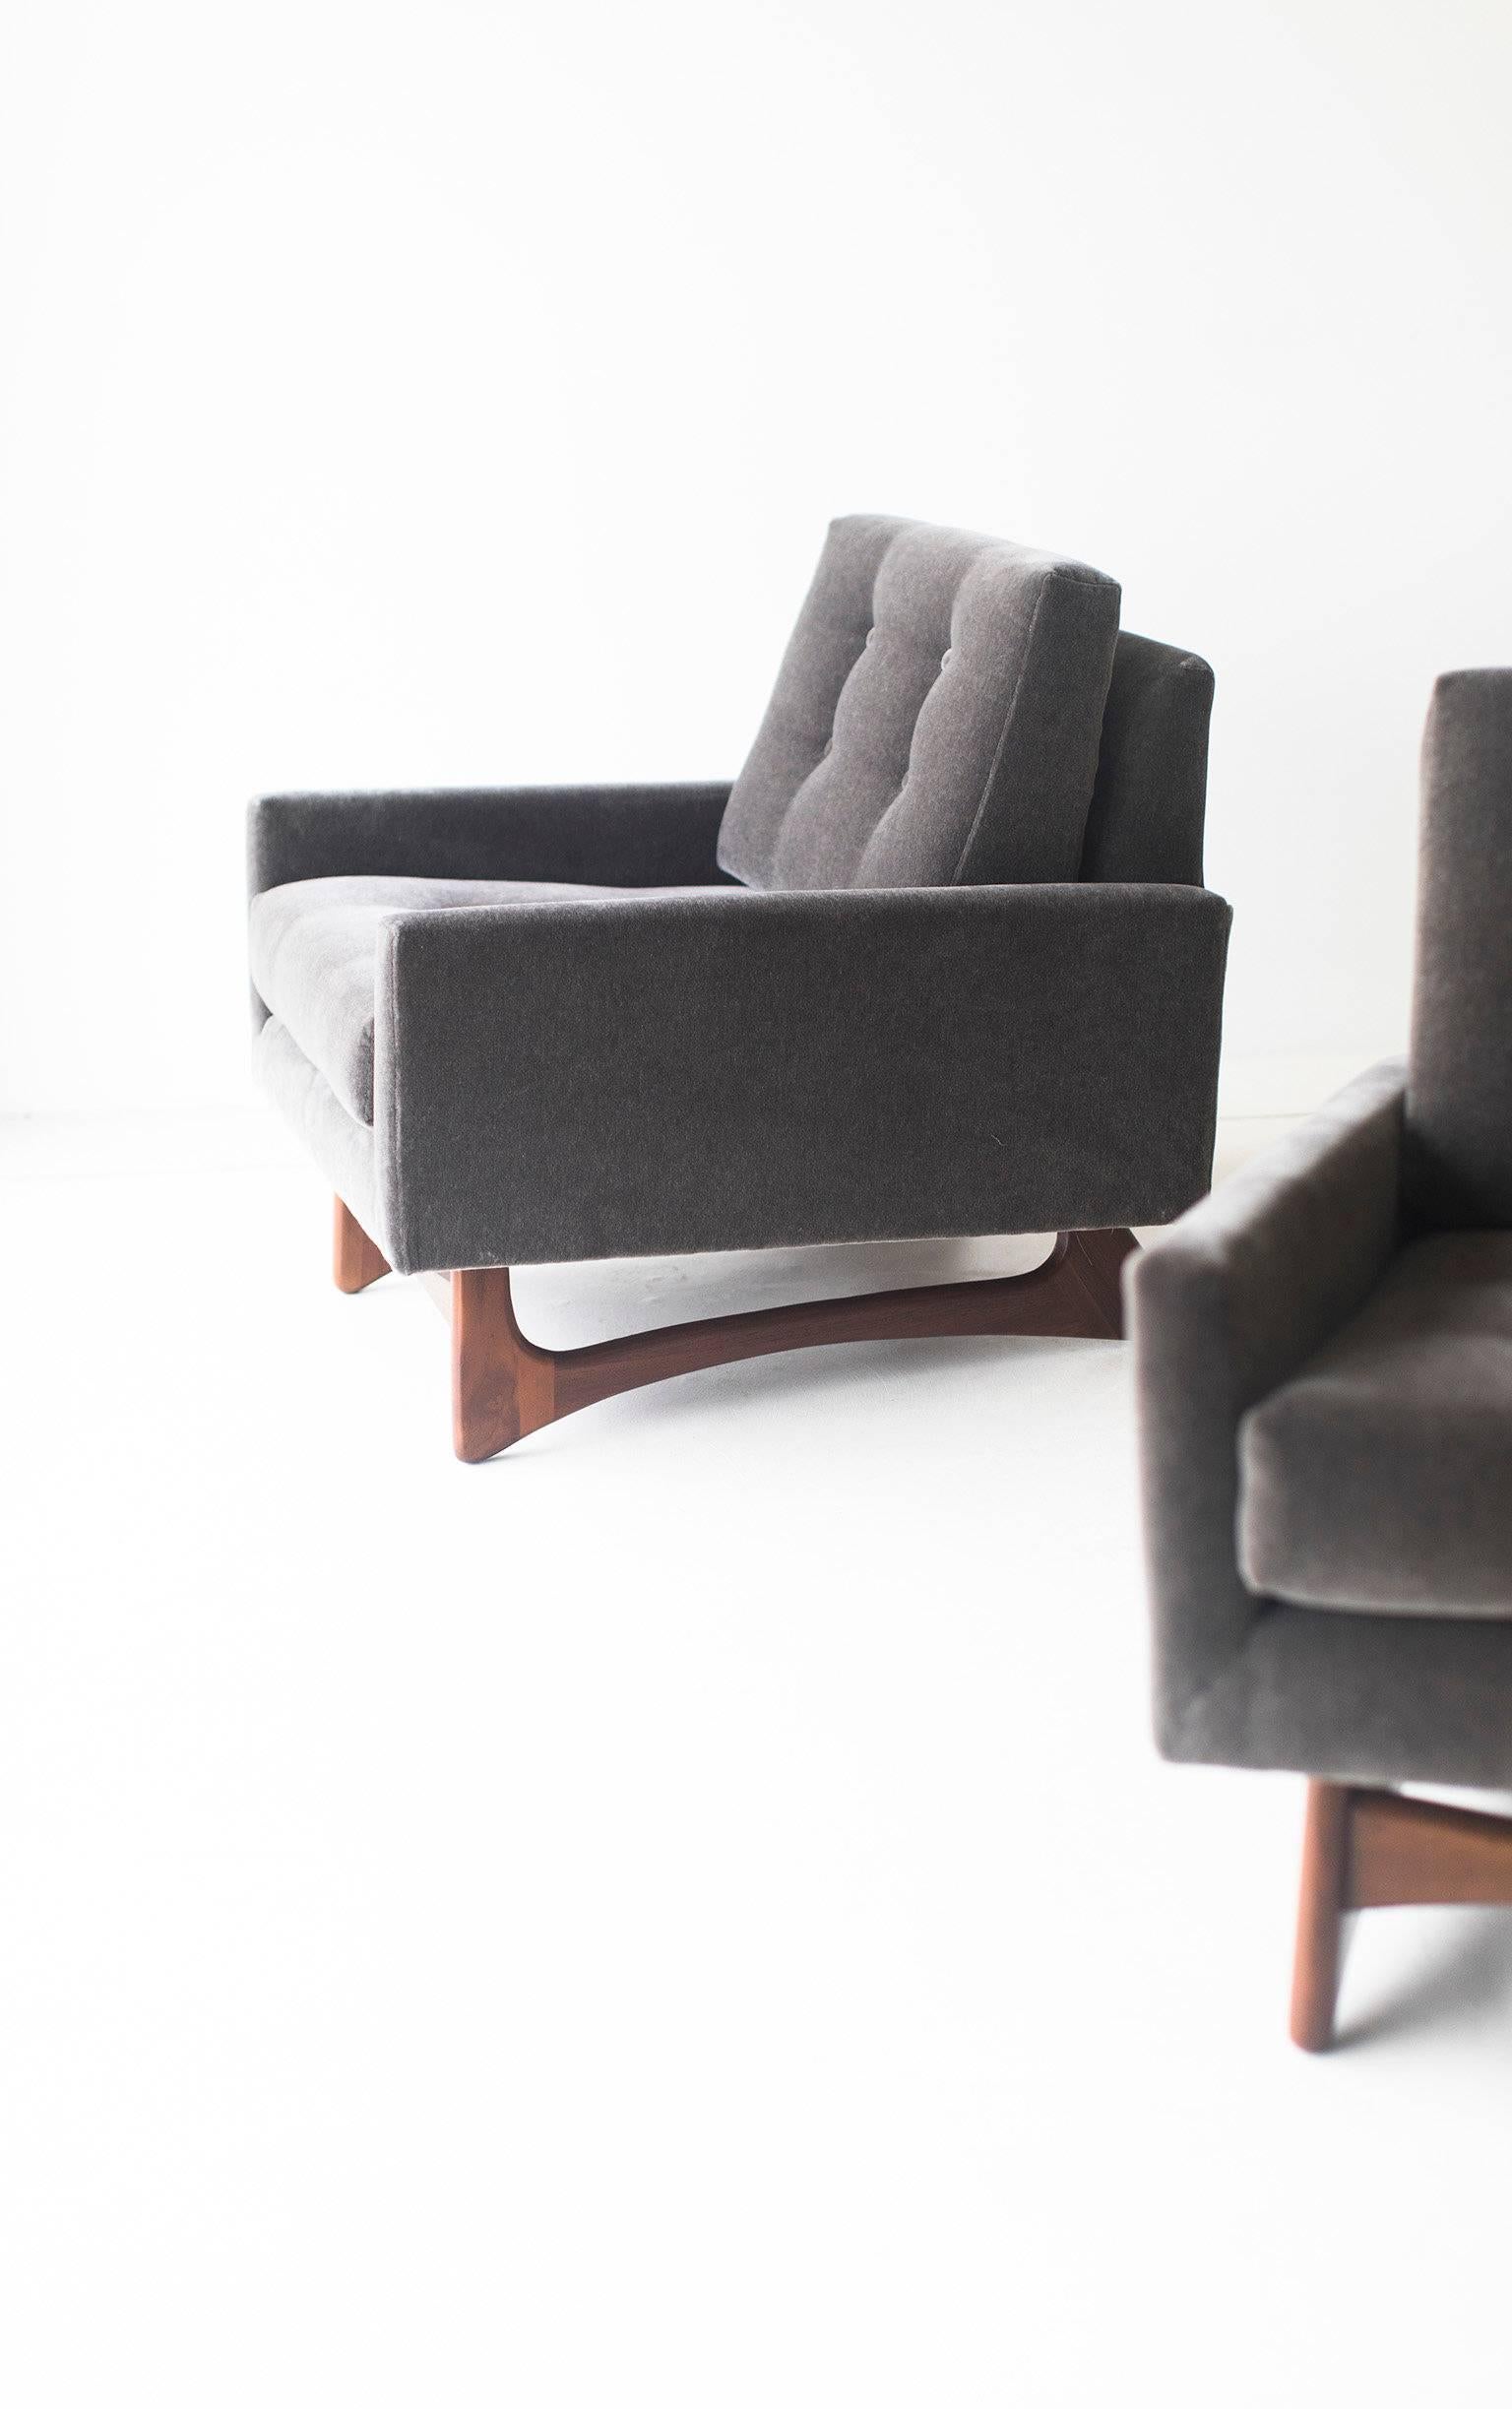 Mid-Century Modern Adrian Pearsall Lounge Chairs for Craft Associates Inc.